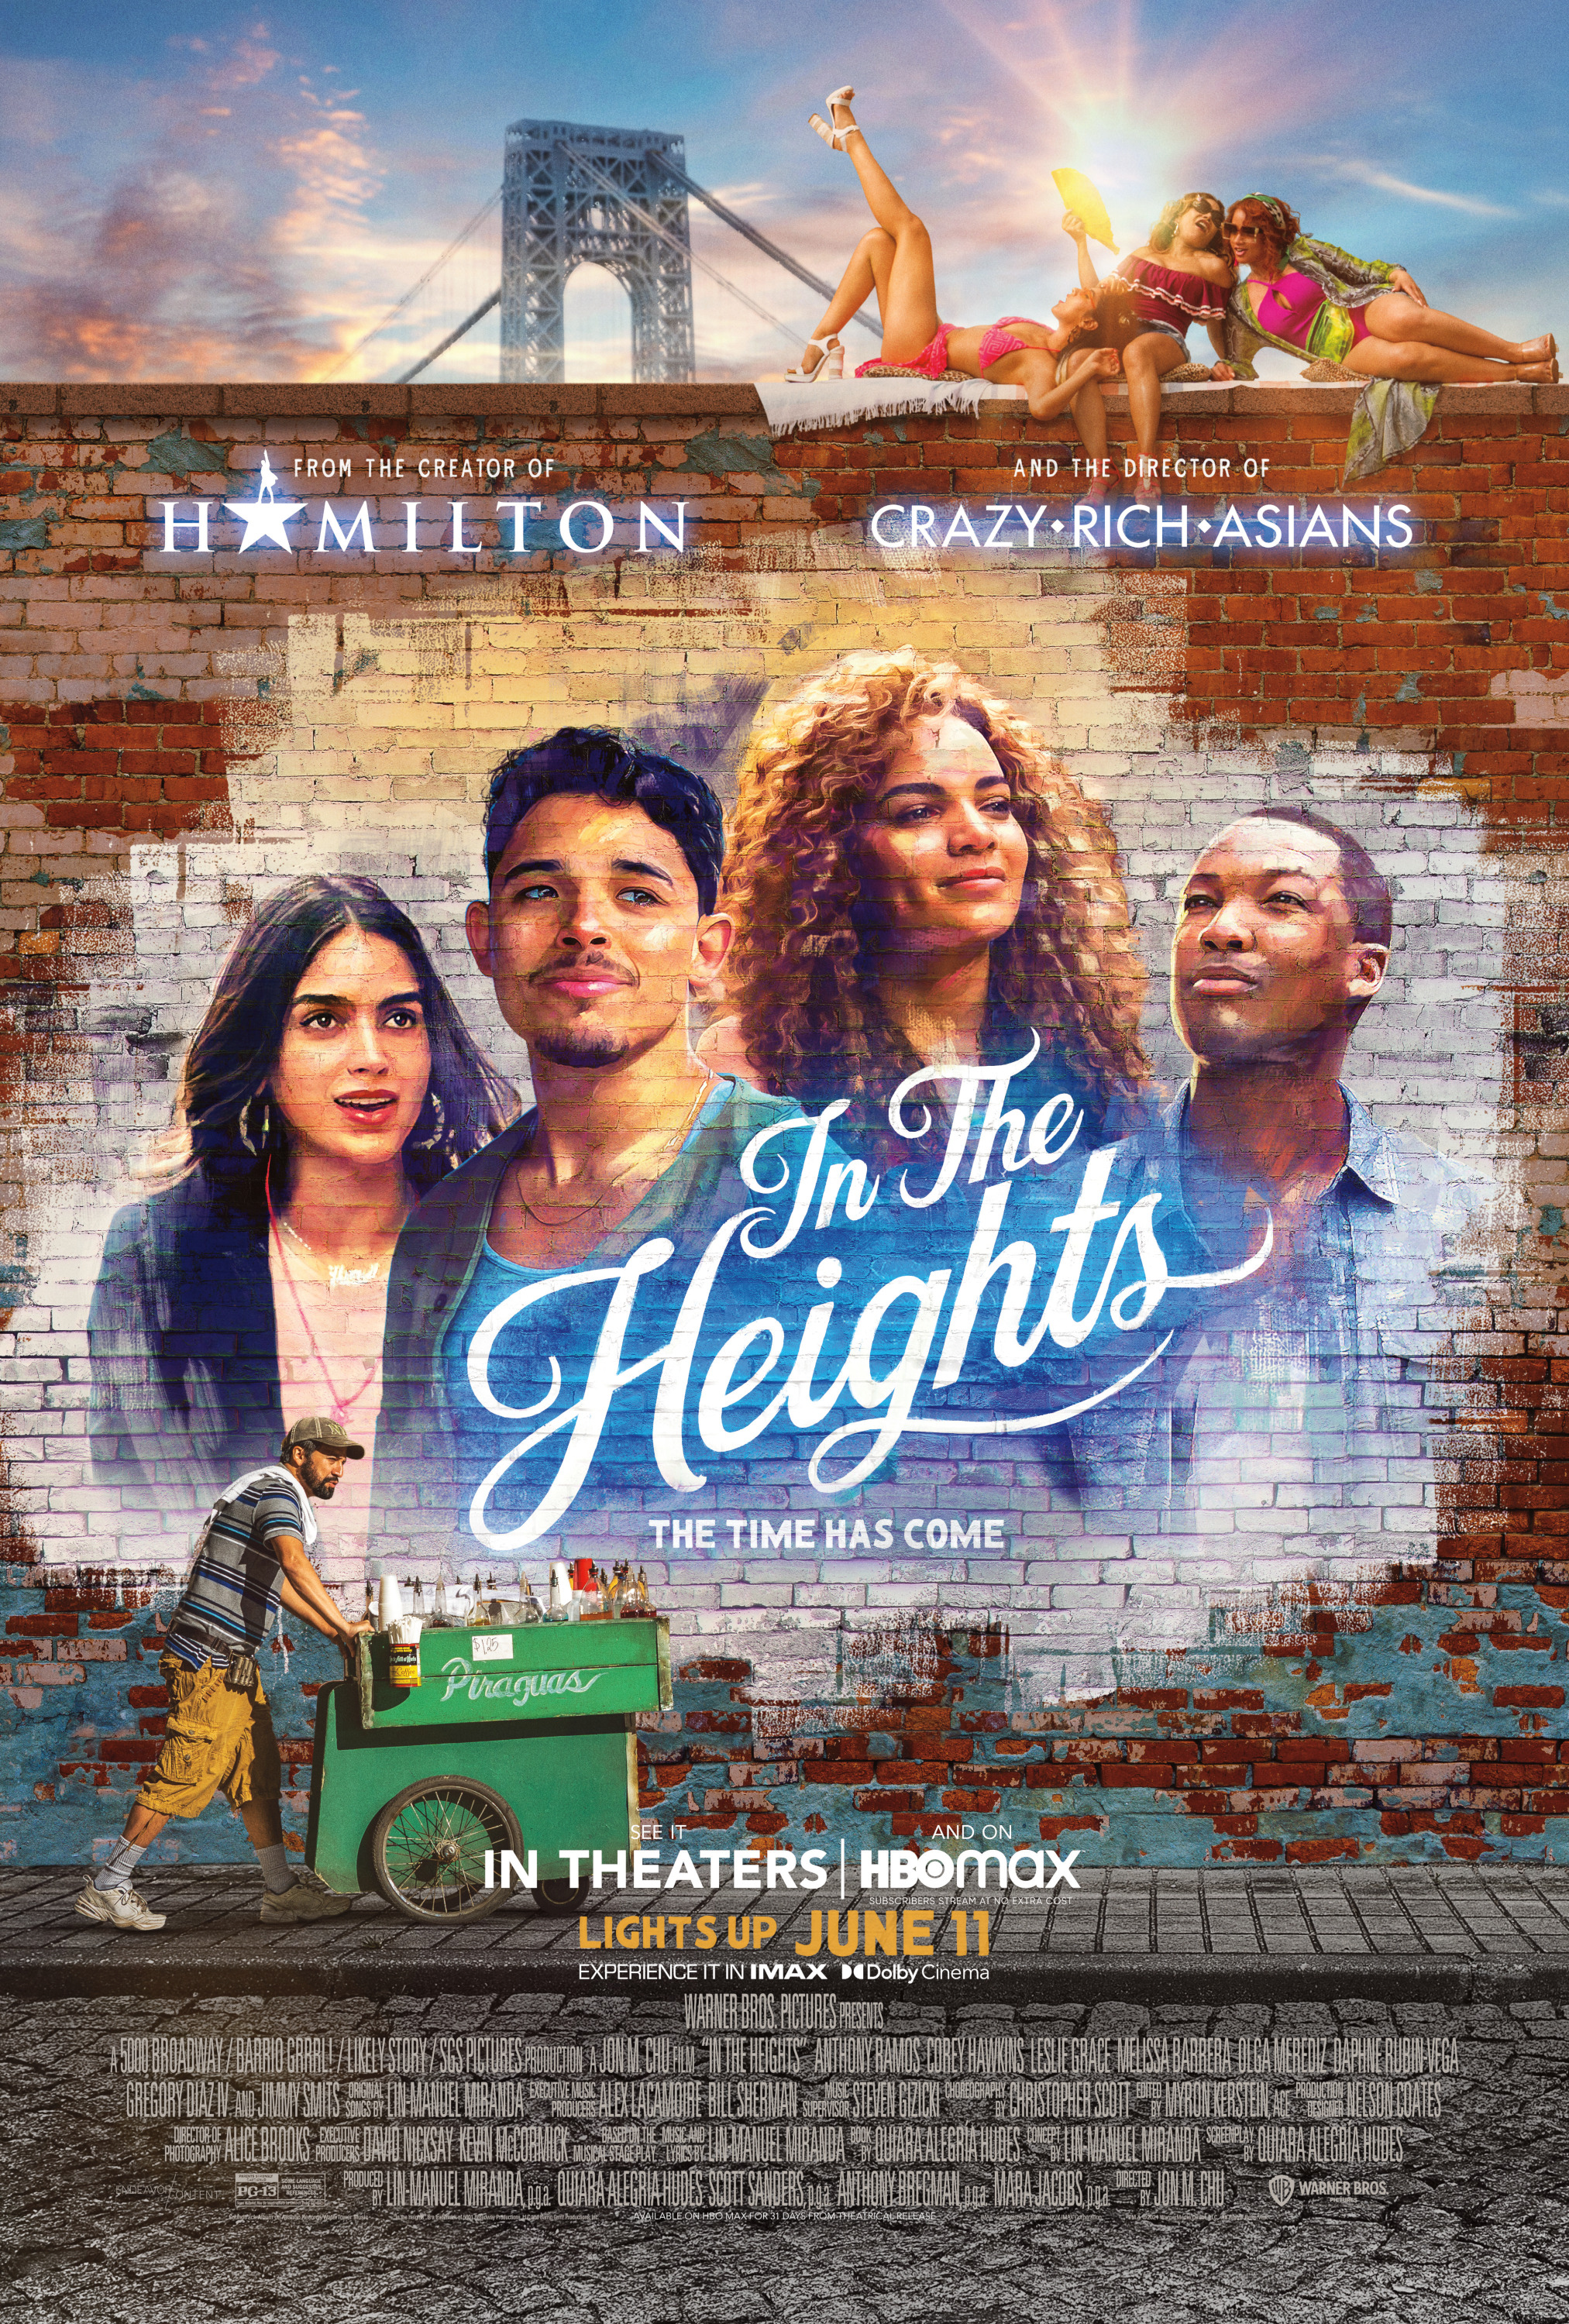 Cover Art for "In the Heights" by Lin Manuel Miranda